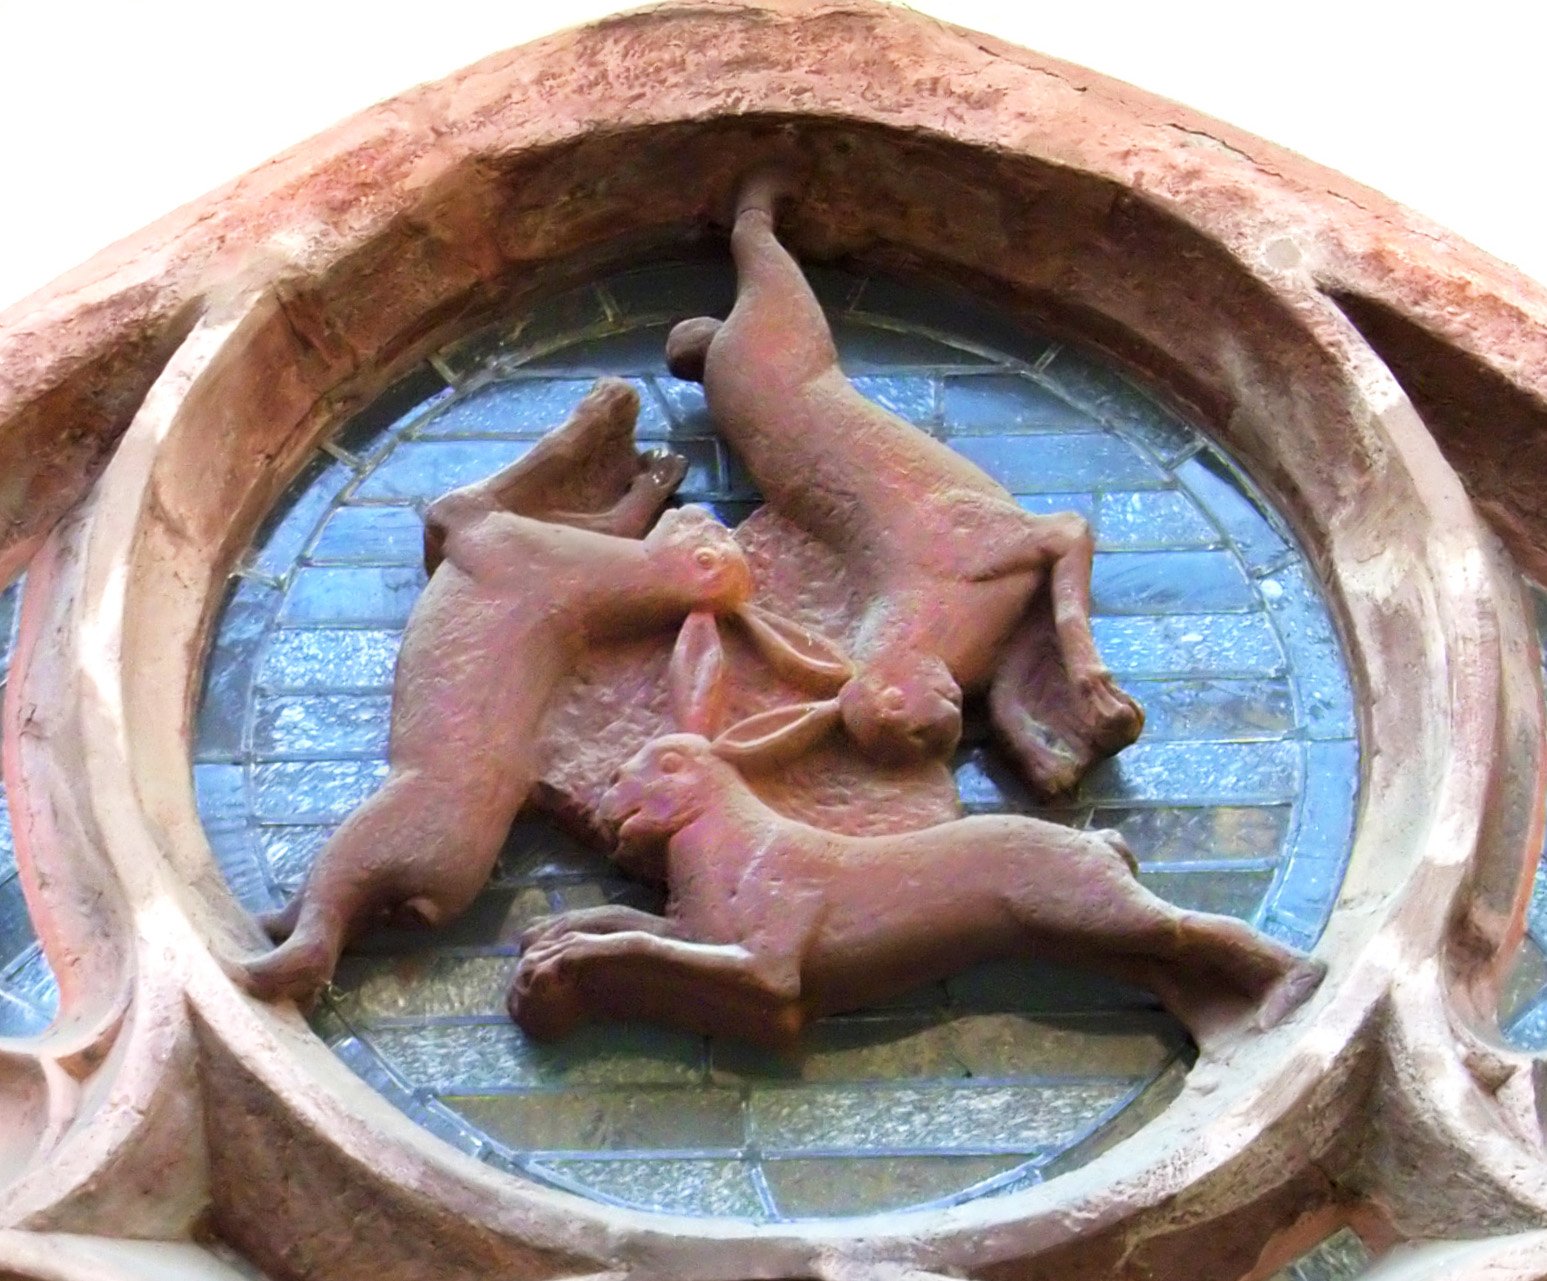 A terracotta sculpture of three rabbits in a circle, set in a round window with a blue background and a brick wall. The rabbits are playful and intertwined, their three ears joined together to form a triangle between them depicting the Holy Trinity.